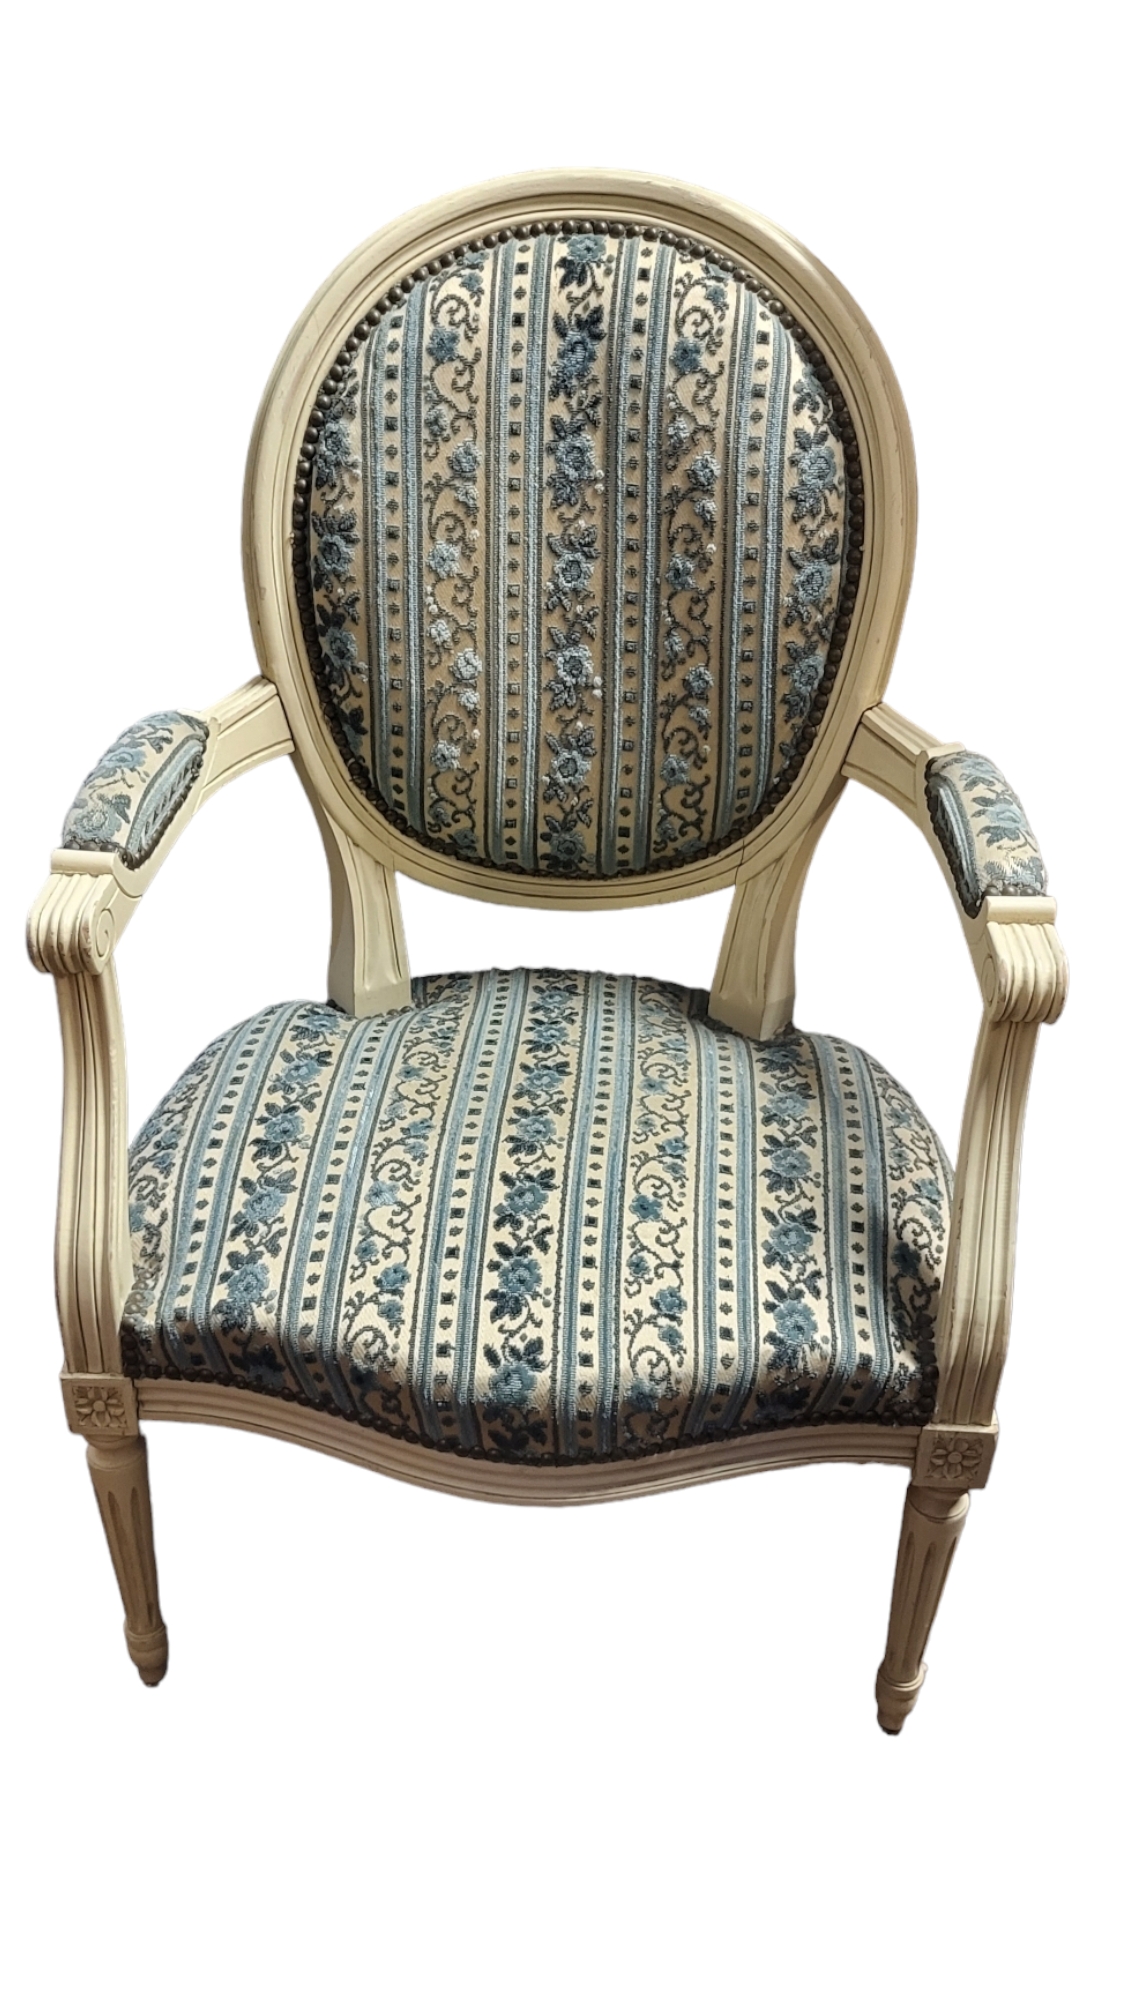 A FRENCH CREAM PAINTED SPOON BACK OPEN ARMCHAIR In cut velvet upholstery. (57cm x 49cm x 90cm)